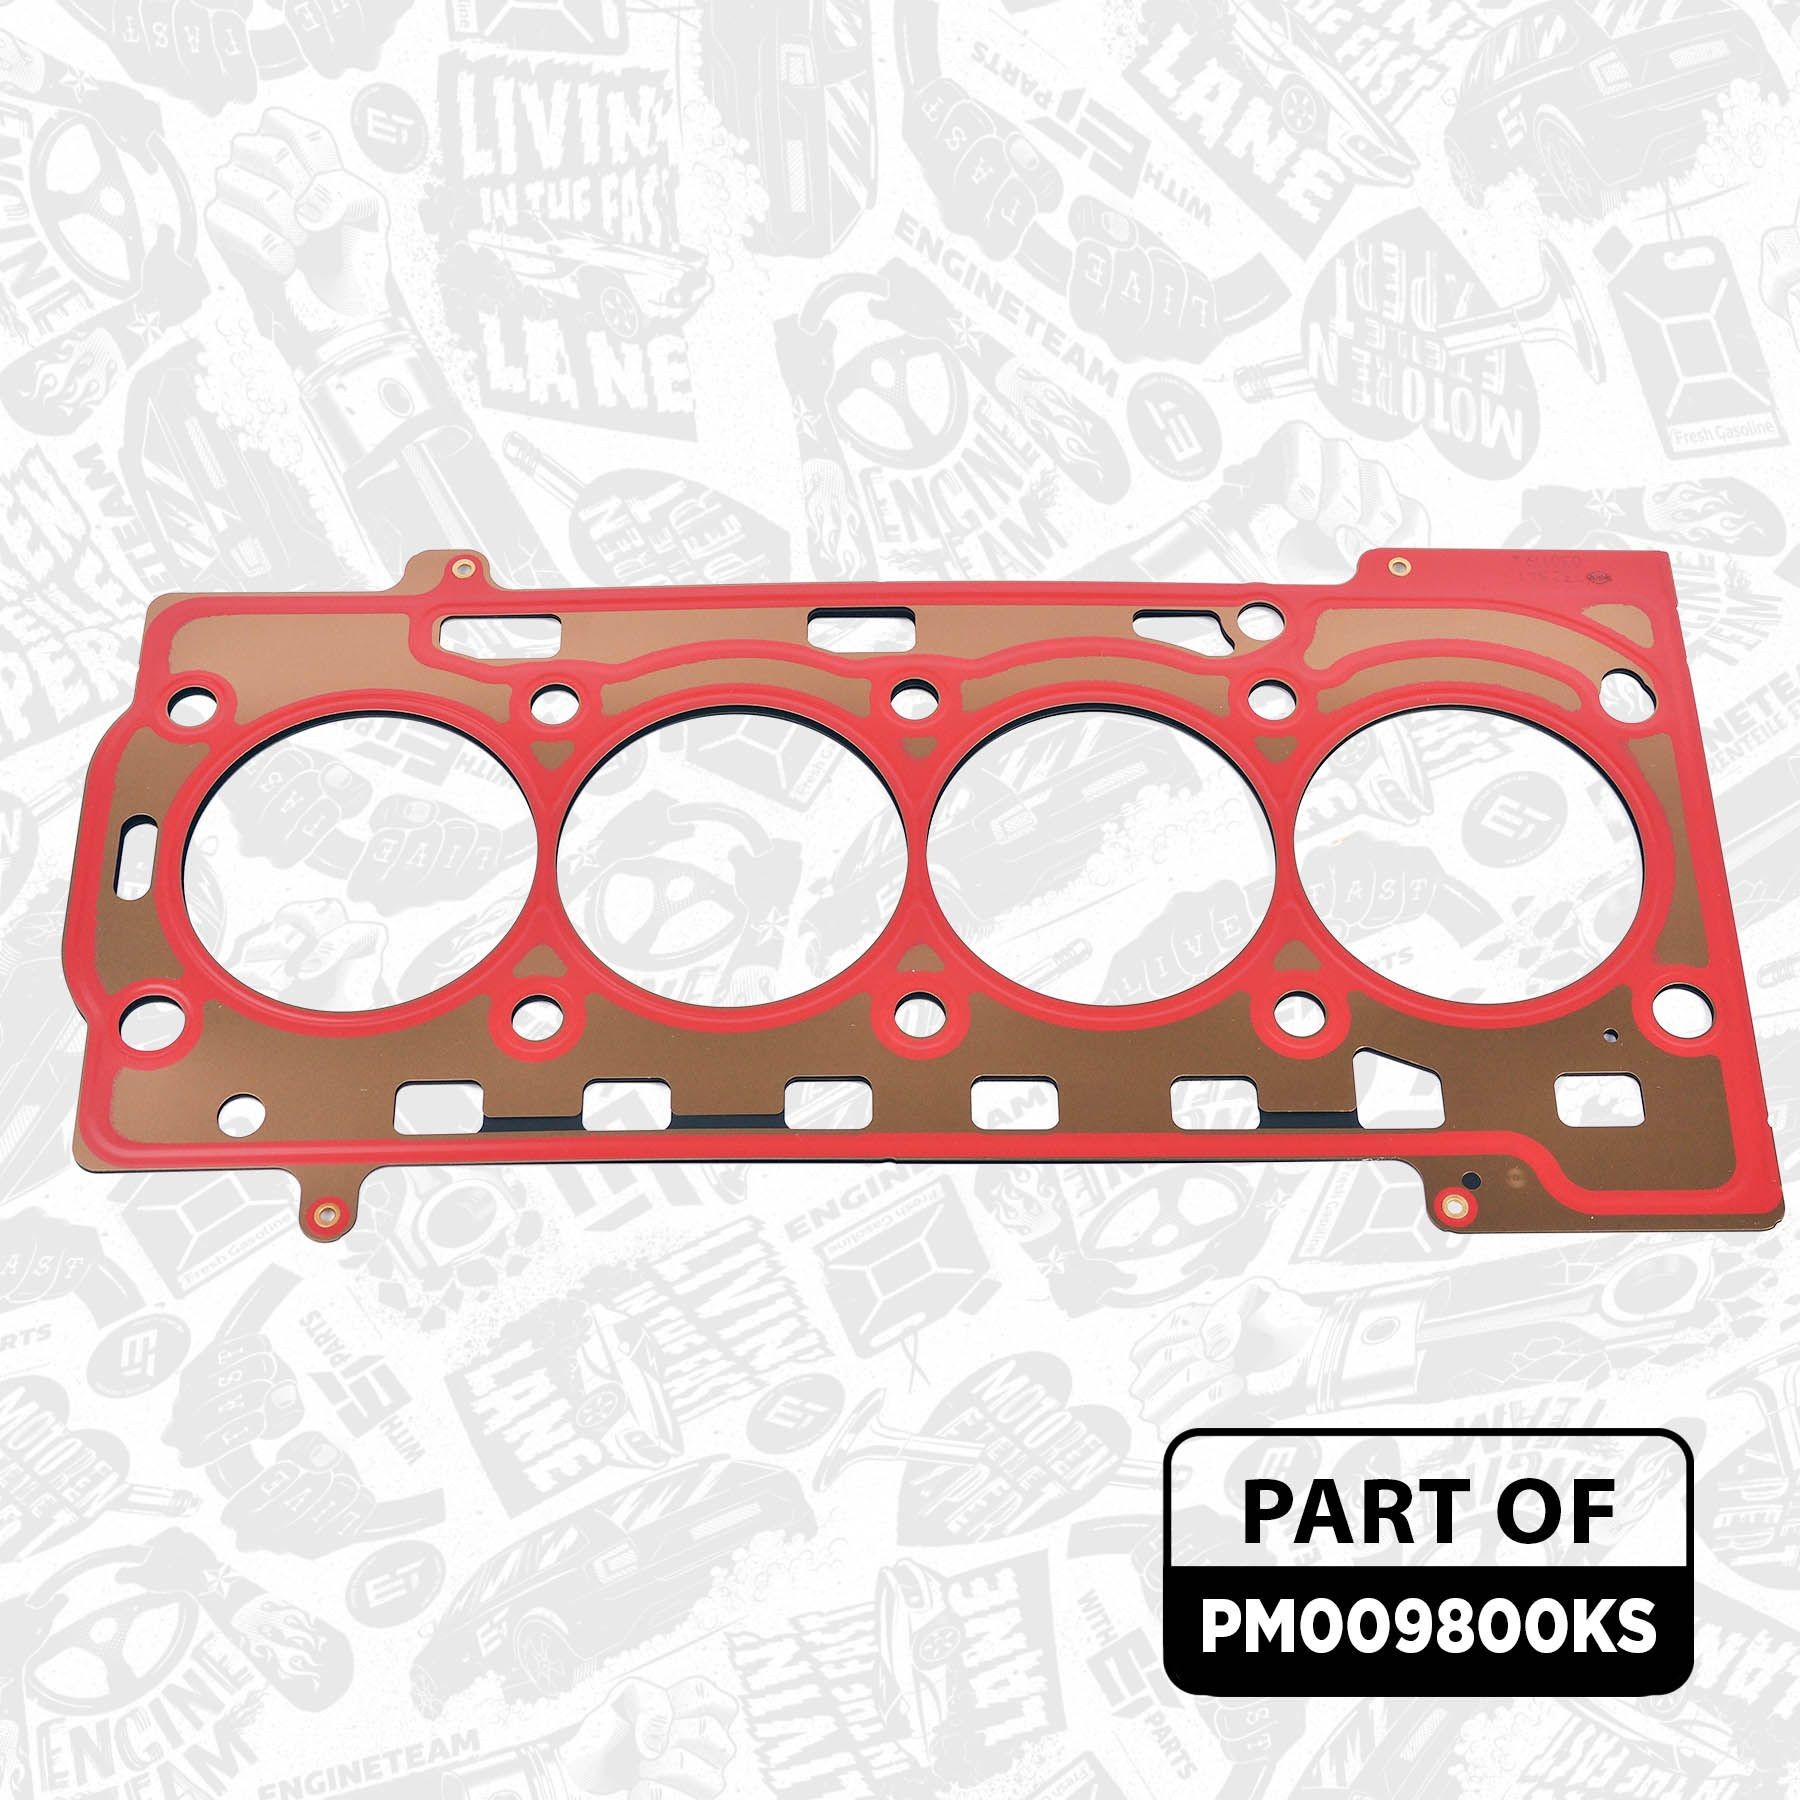 PM009800KS Piston PM009800KS ET ENGINETEAM 76,5 mm, with piston rings, with cylinder head gasket, with screw set